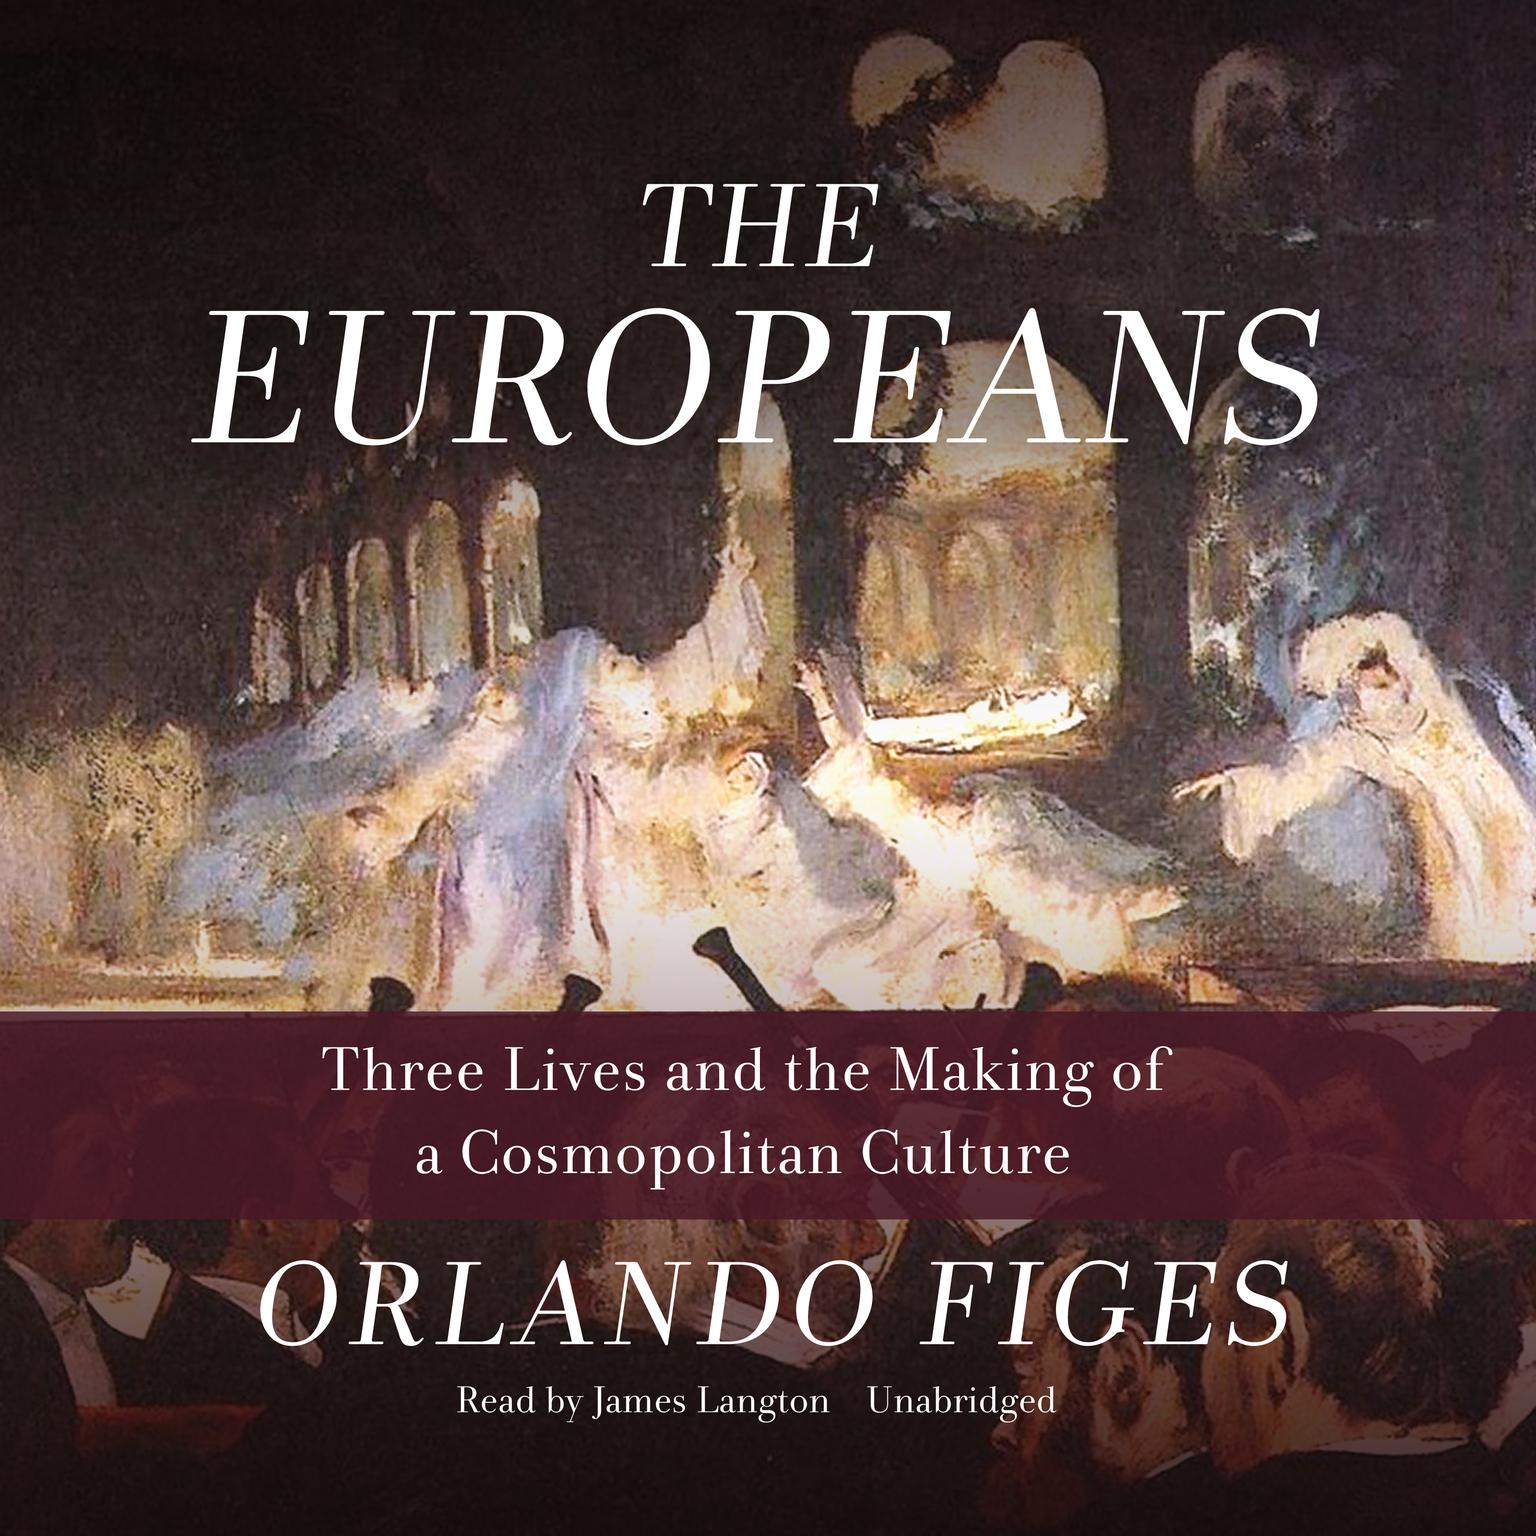 The Europeans: Three Lives and the Making of a Cosmopolitan Culture Audiobook, by Orlando Figes